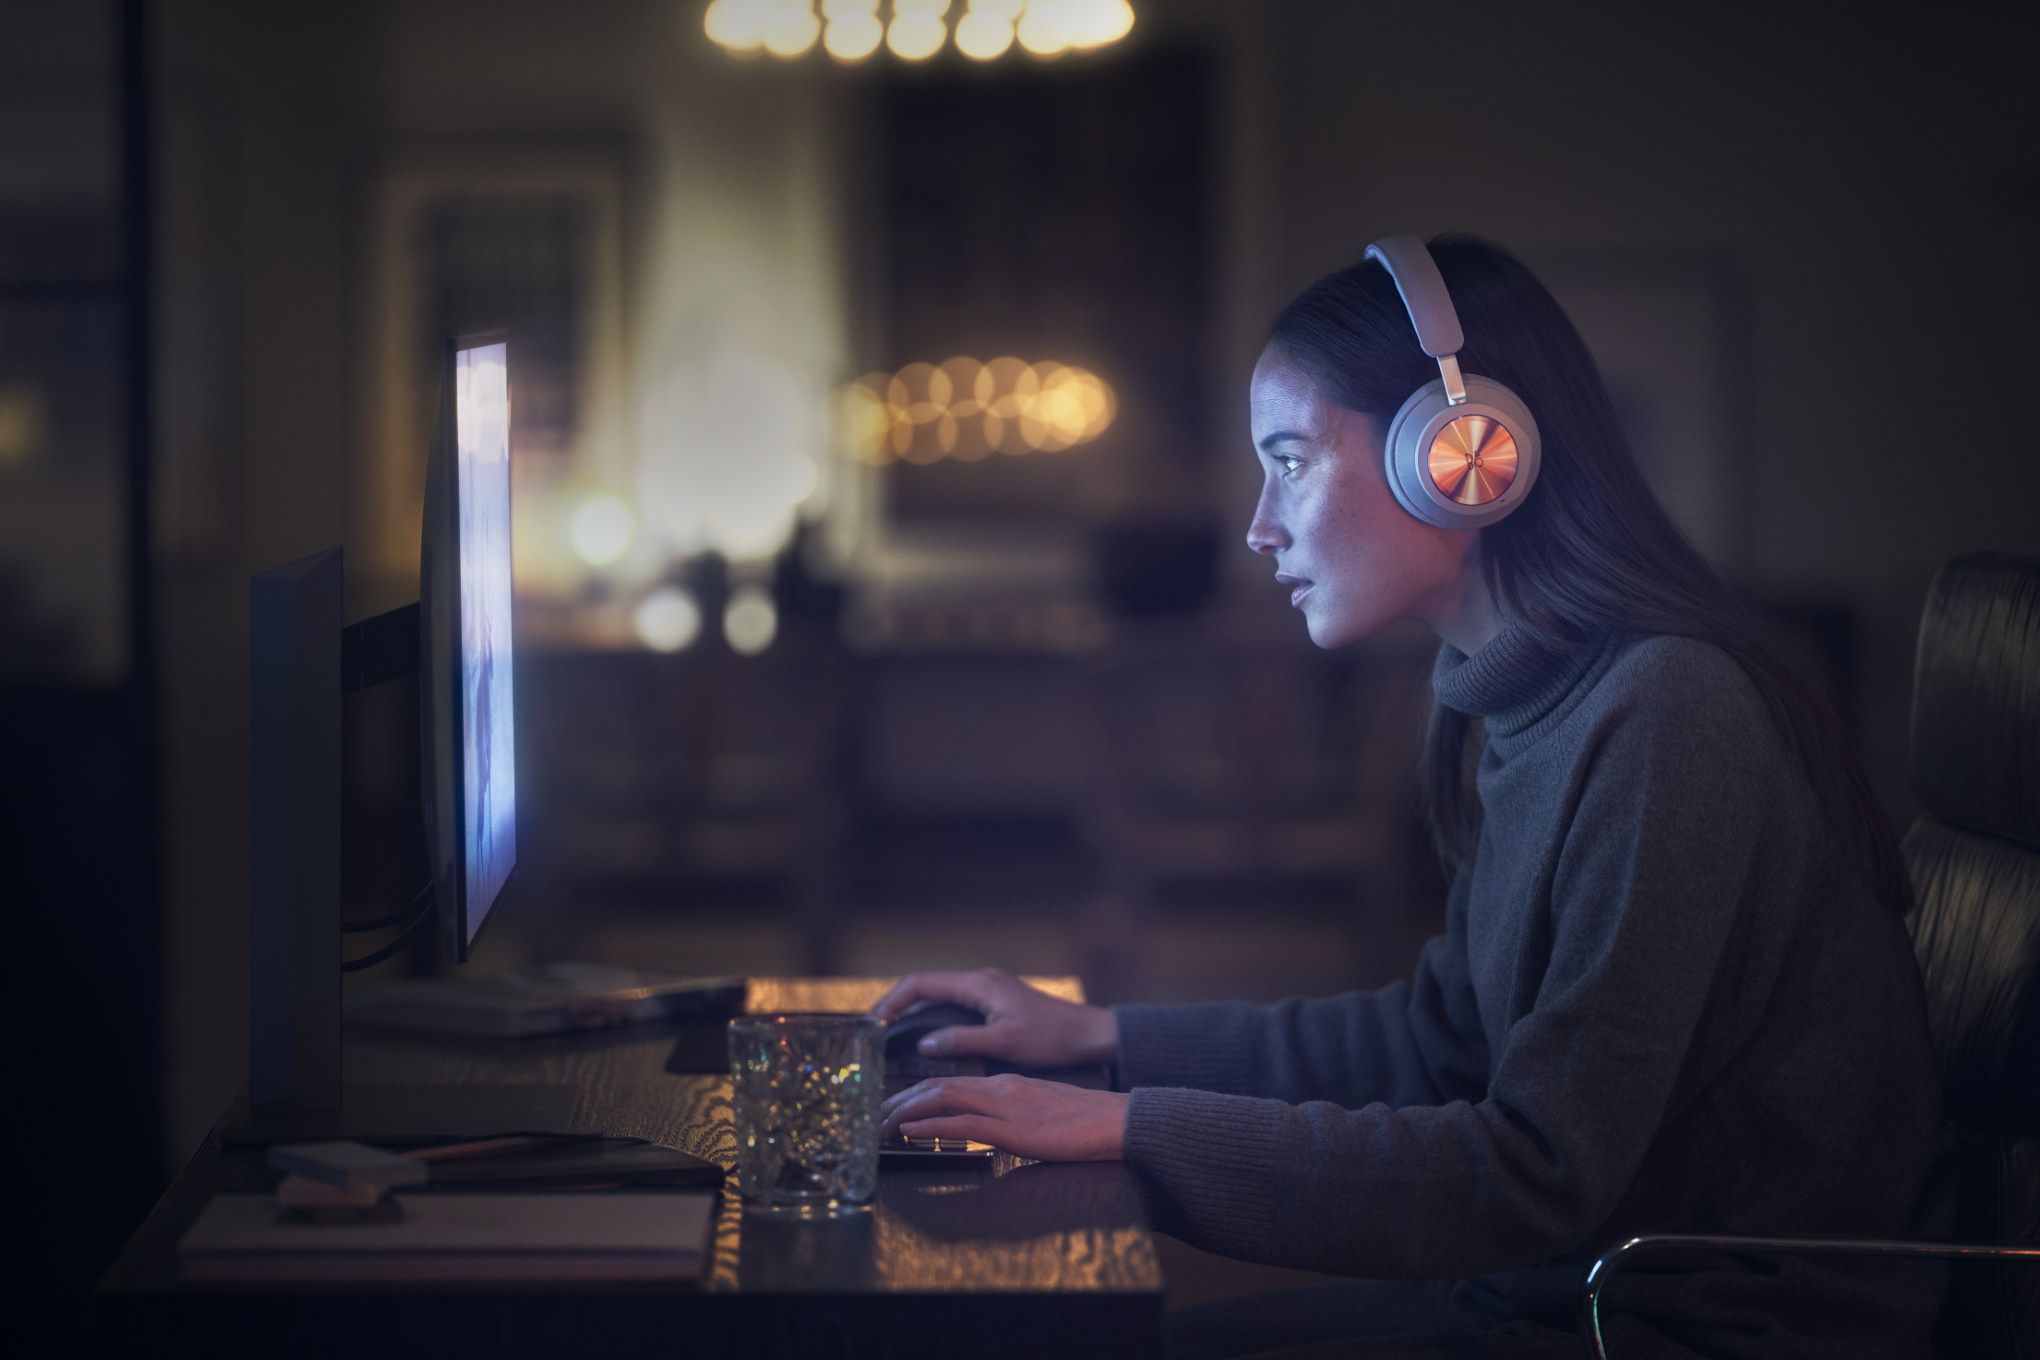 A woman playing with B&O Beoplay Portal / B&O Beoplay Portal headphones